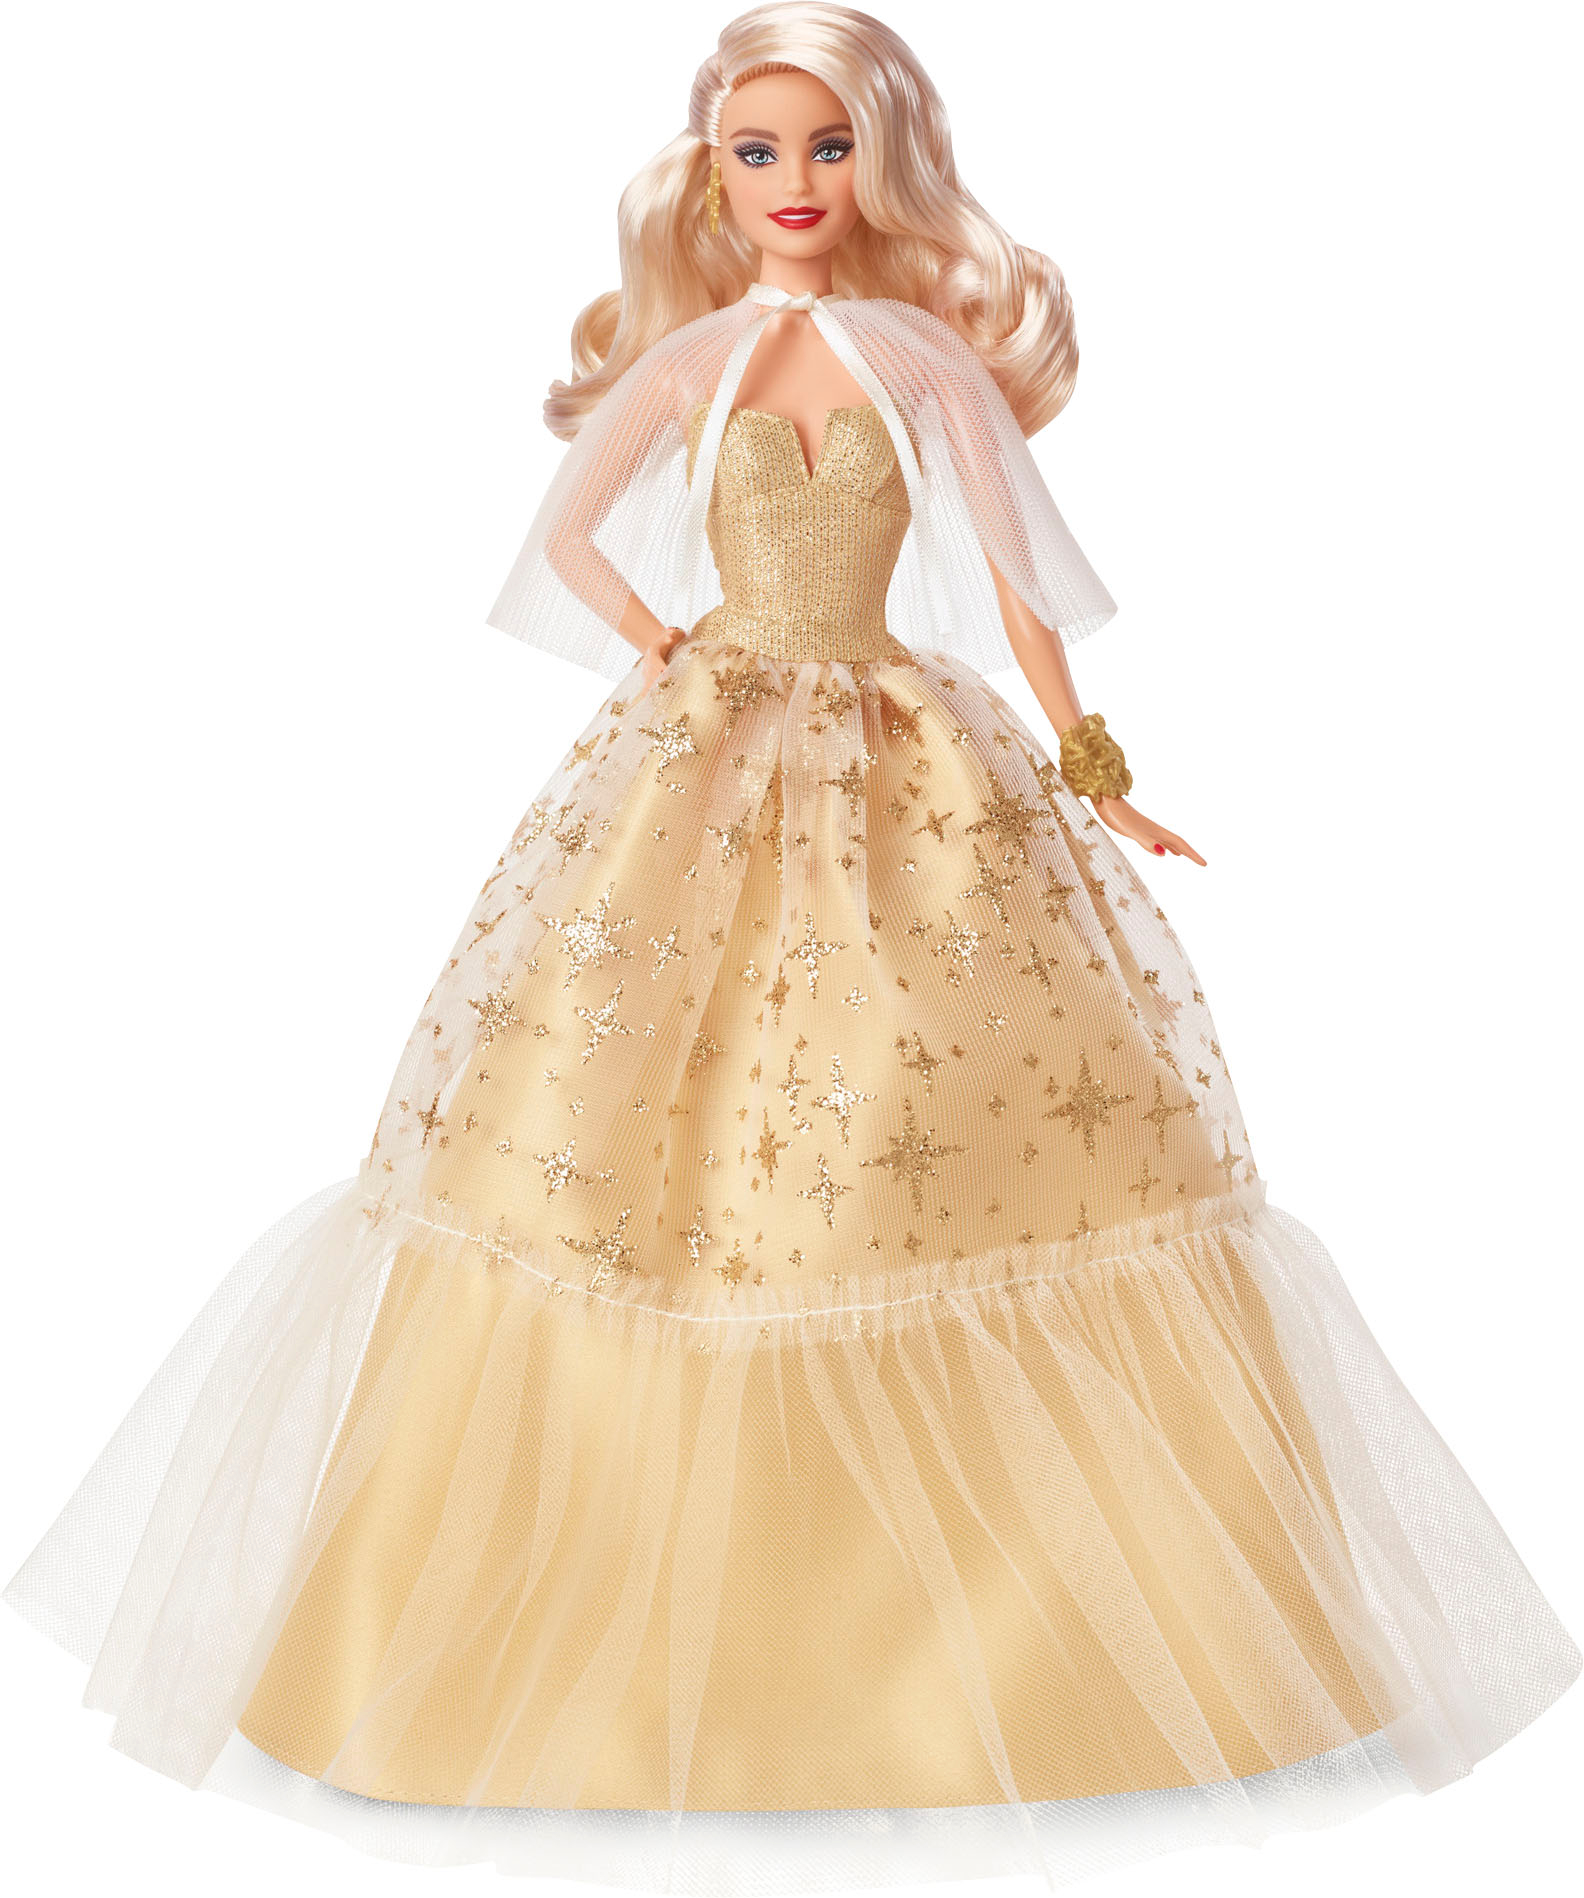 Barbie Signature 2023 Holiday Collectible Blond Doll HJX04 - Best Buy